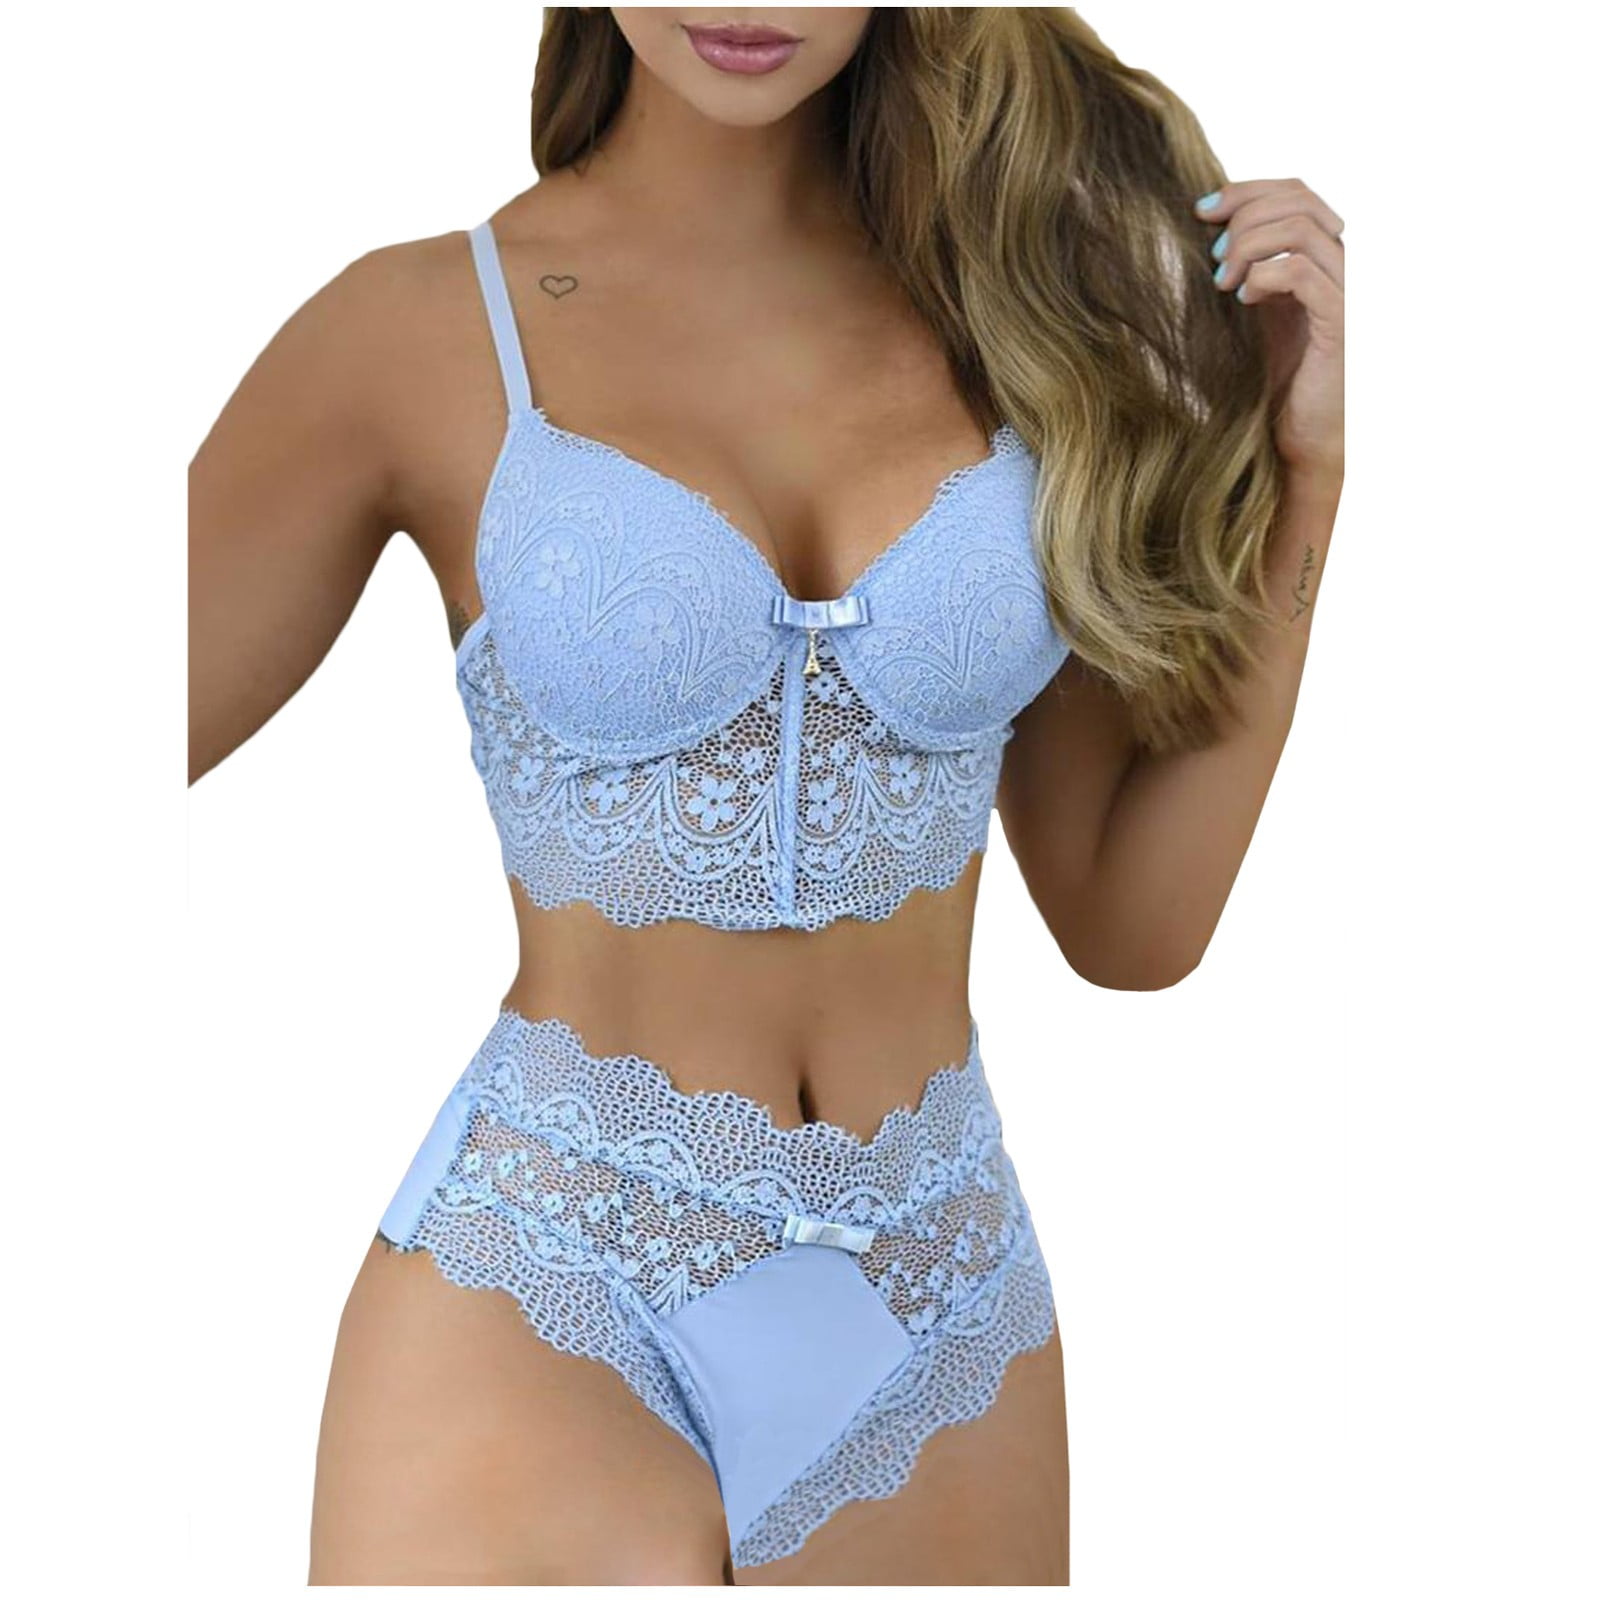 Anuirheih Lace Lingerie Sets for Women Padded Push Up Bra with Clasp and  Lace Sheer Triangle Briefs,2Pcs 